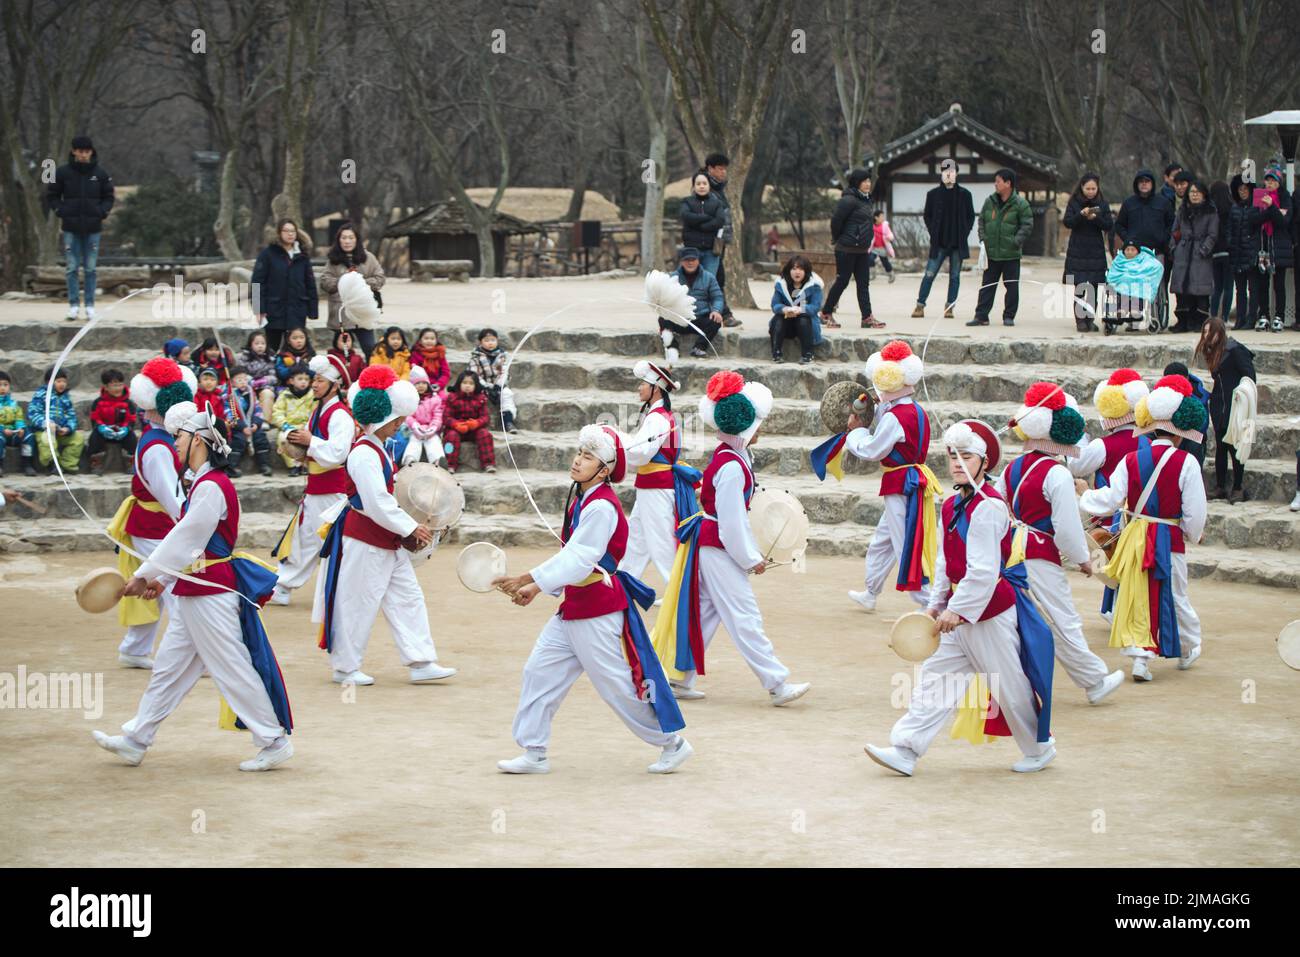 The ending of the traditional Korea farmers dance at the Korean Stock Photo